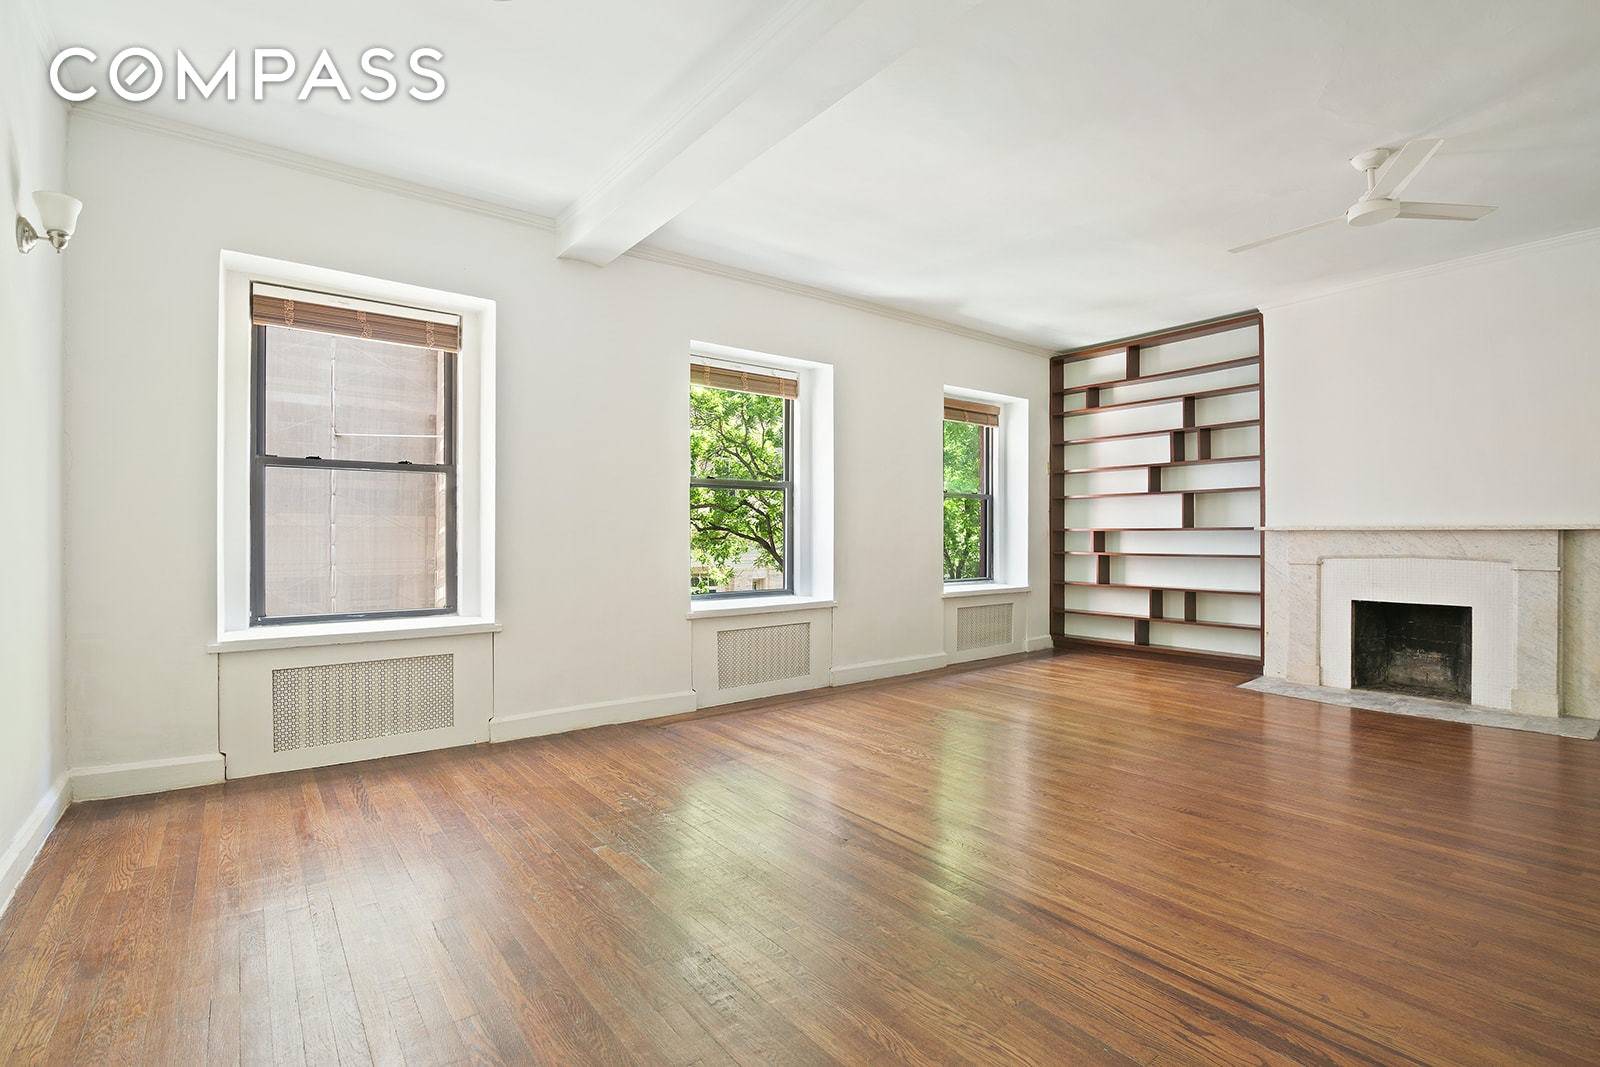 Beautiful and spacious 2 bedroom 2 bathroom duplex apartment conveniently located in Gramercy Park.